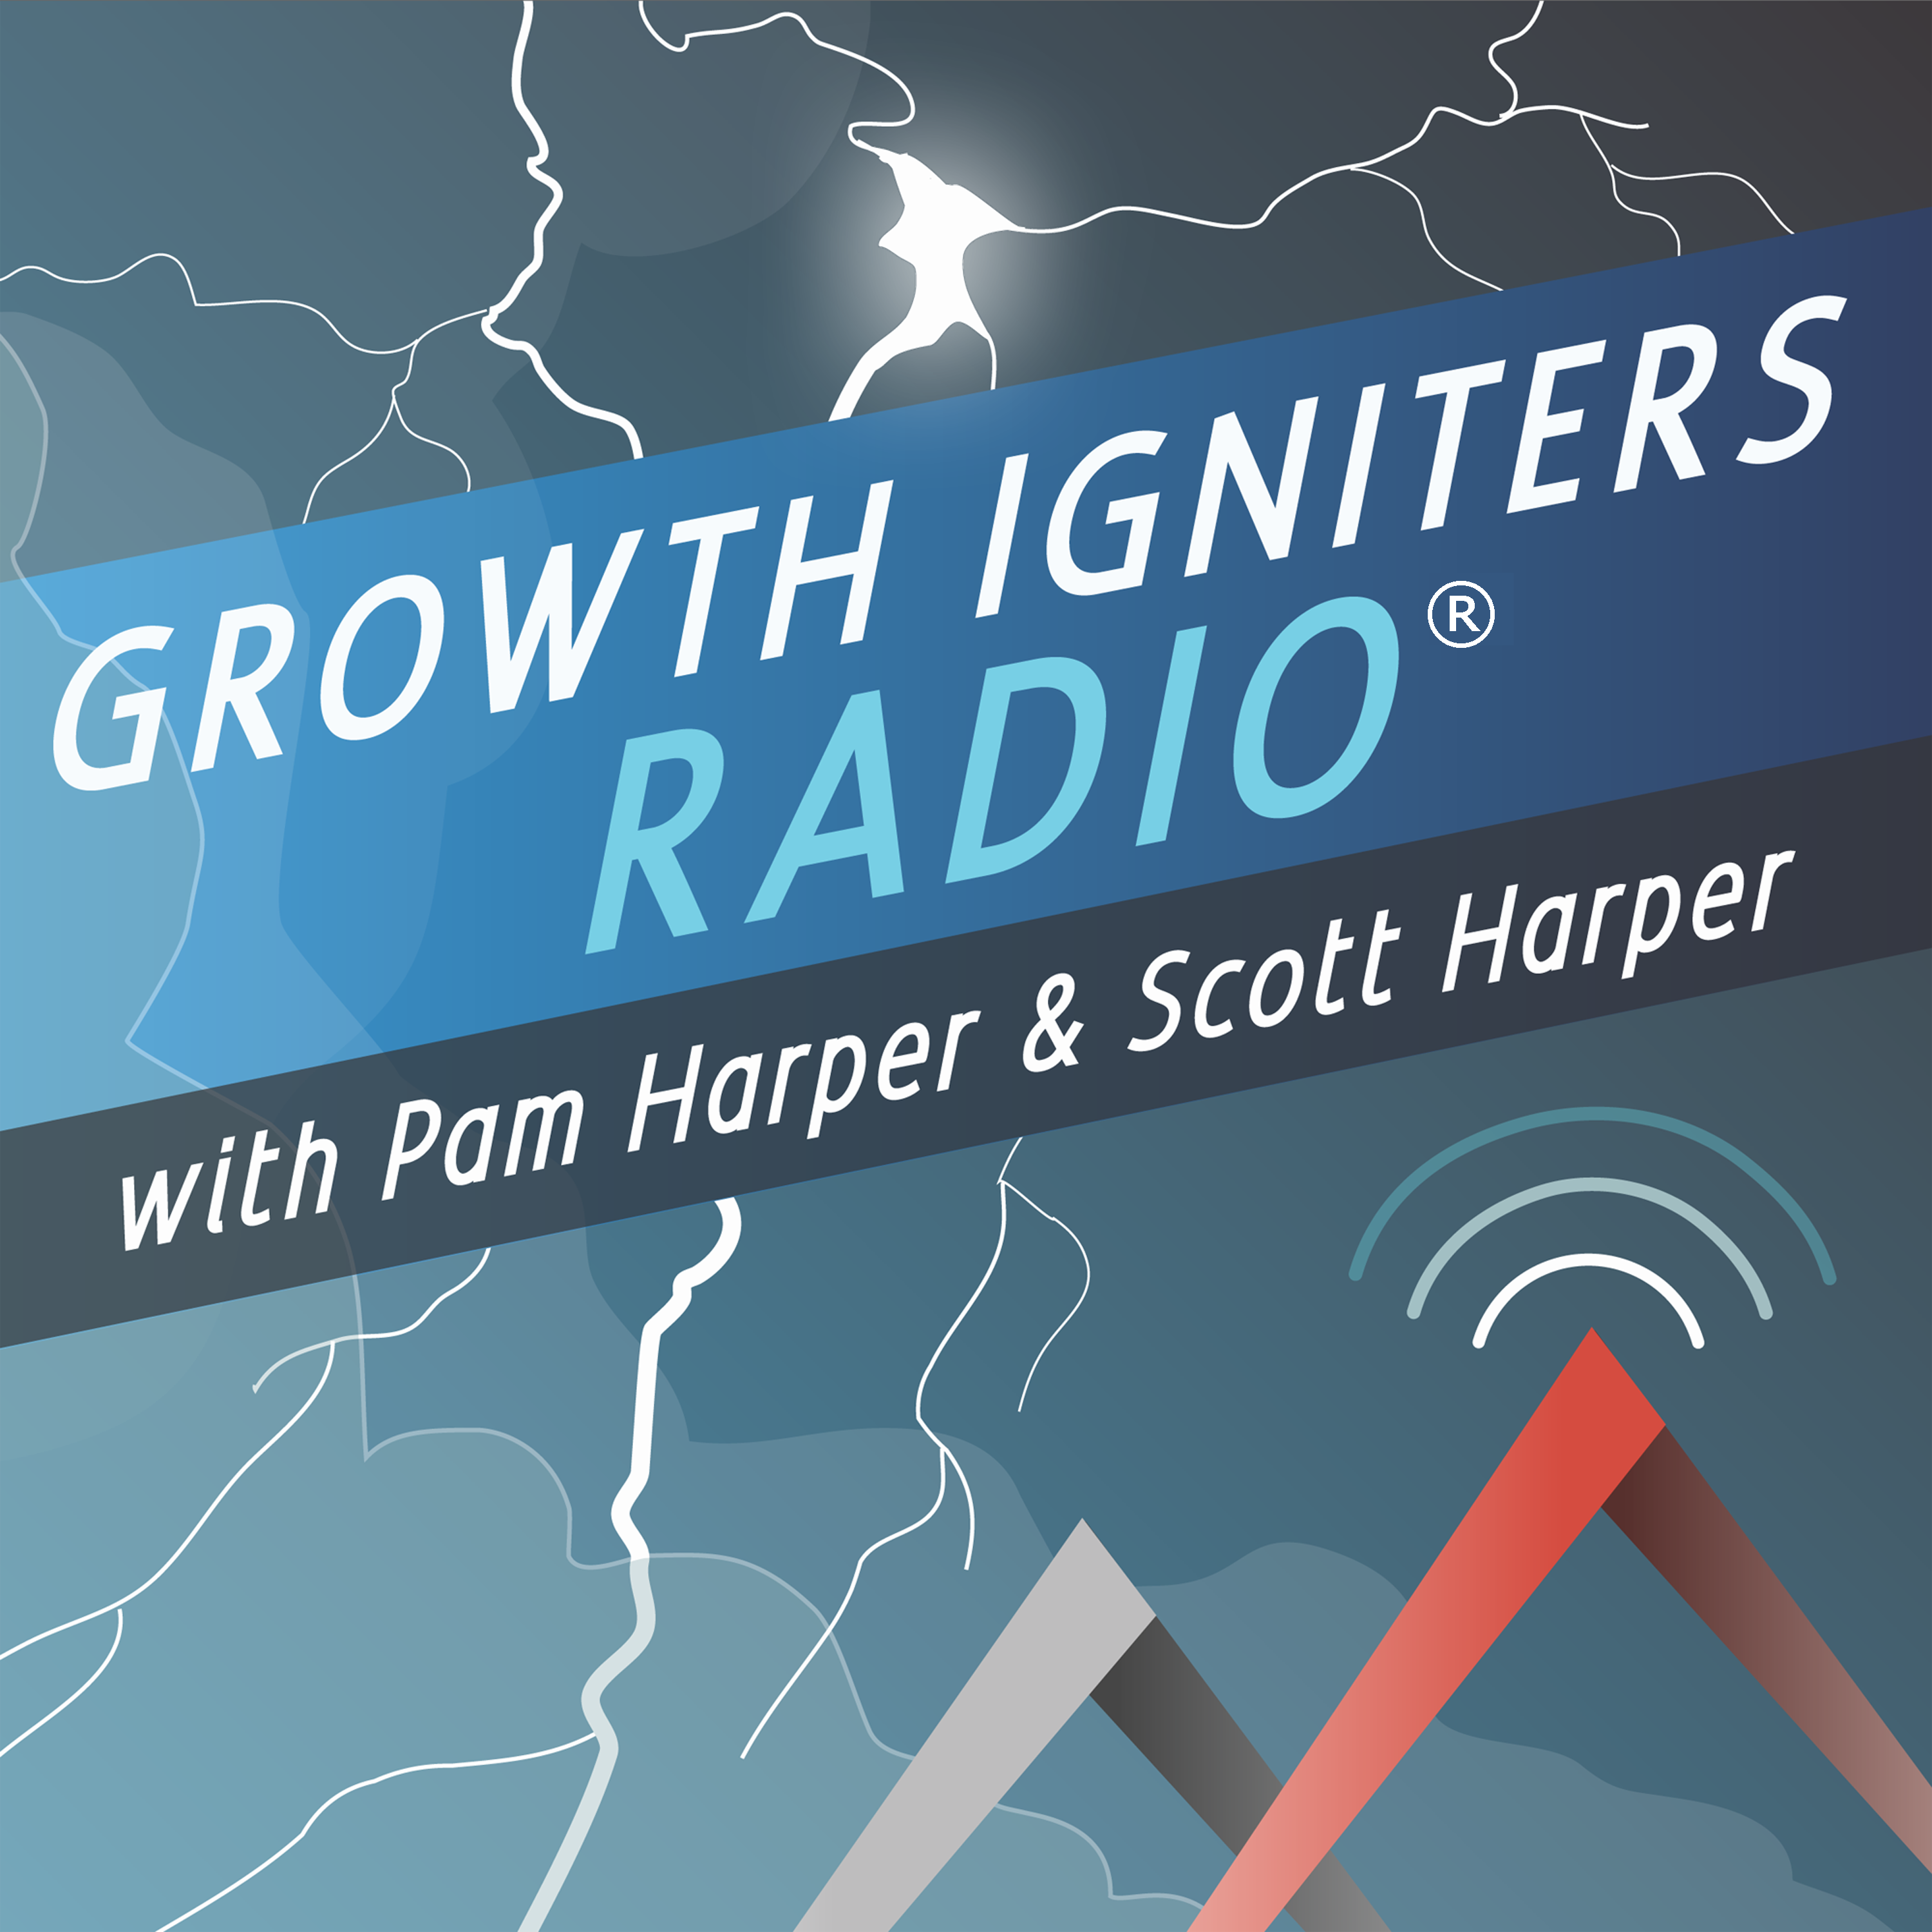 Growth Igniters Radio podcast cover